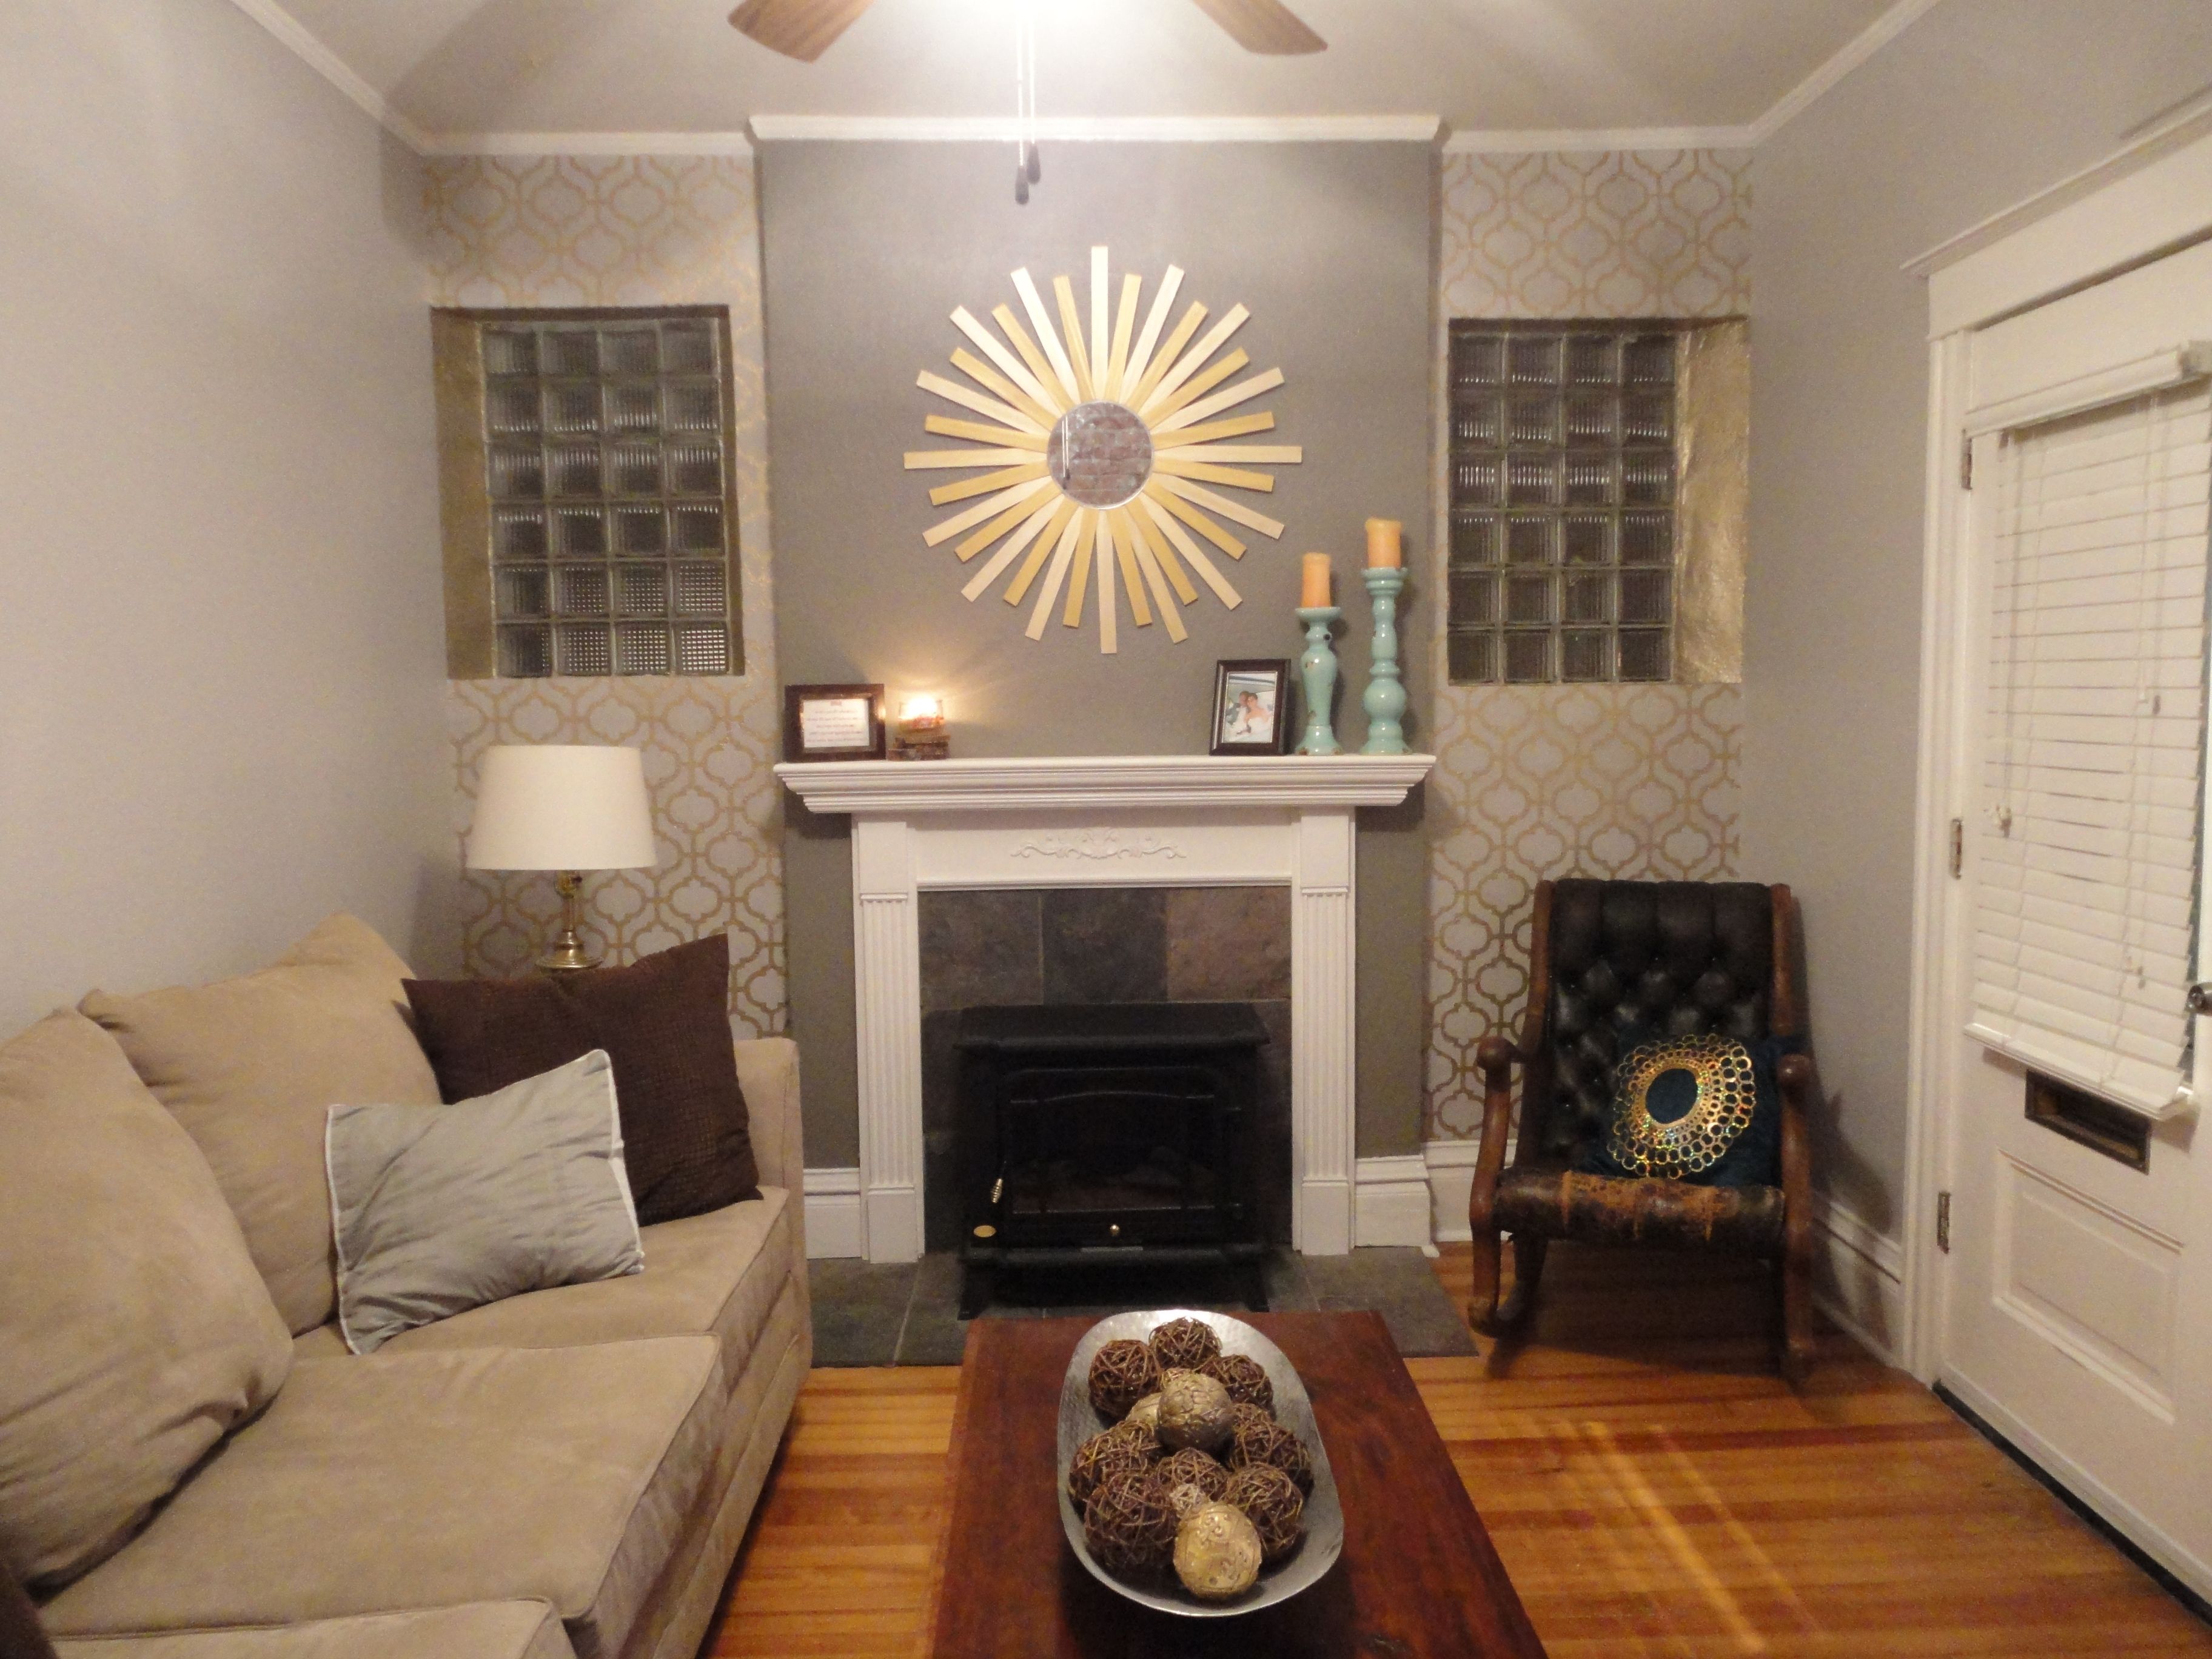 2018 Fireplace Wall Jenna Calder I Went Back And Forth About What Throughout Wall Accents For Fireplace (View 5 of 15)